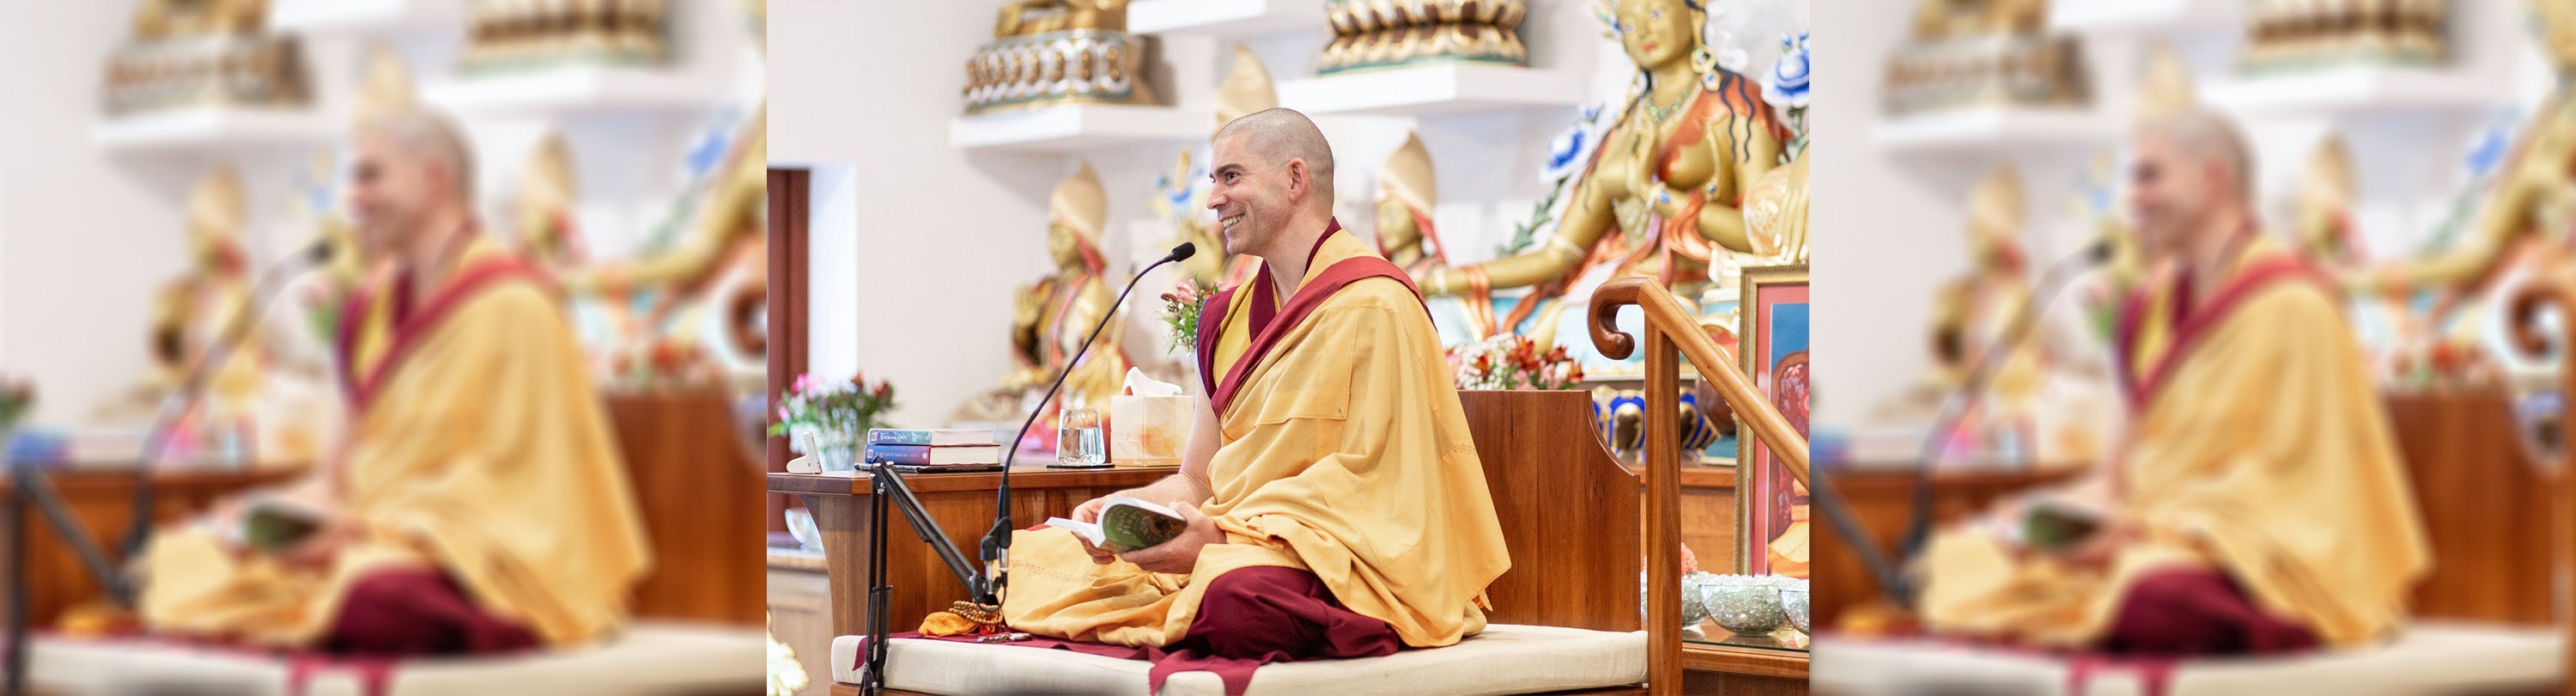 A Buddhist monk is sitting on stage wearing robes and smiling while talking into a microphone